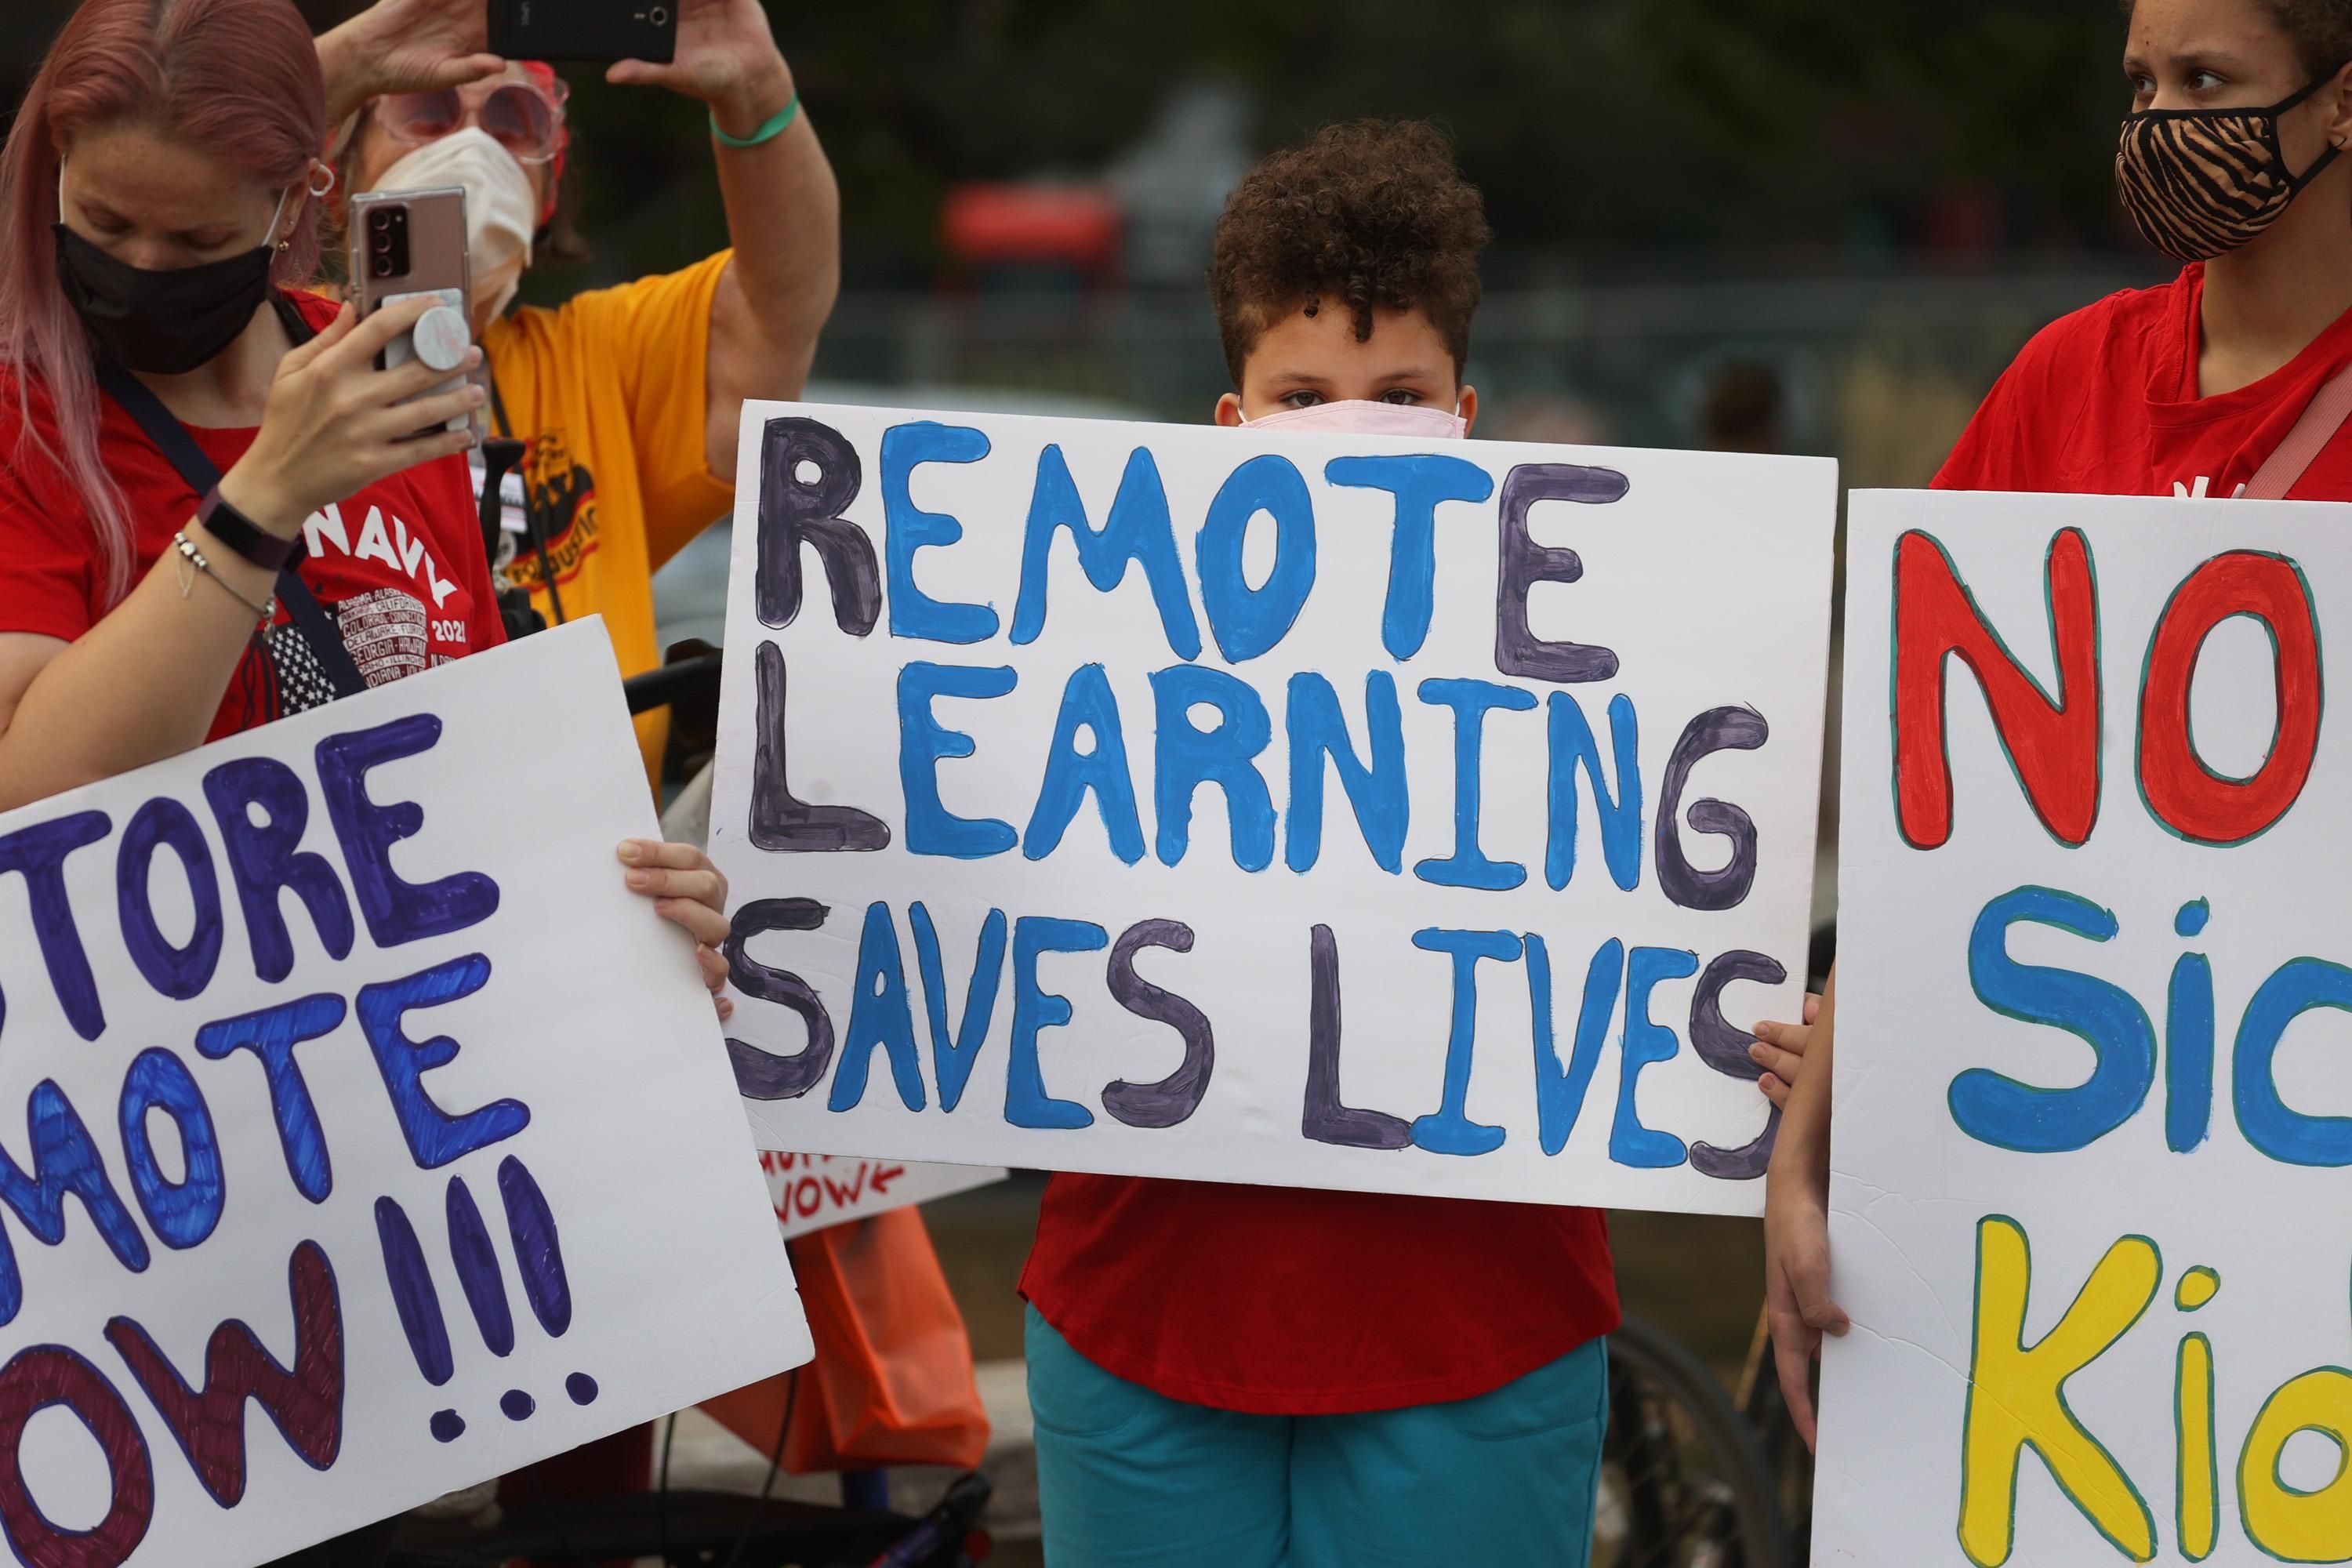 "Remote learning saves lives" sign